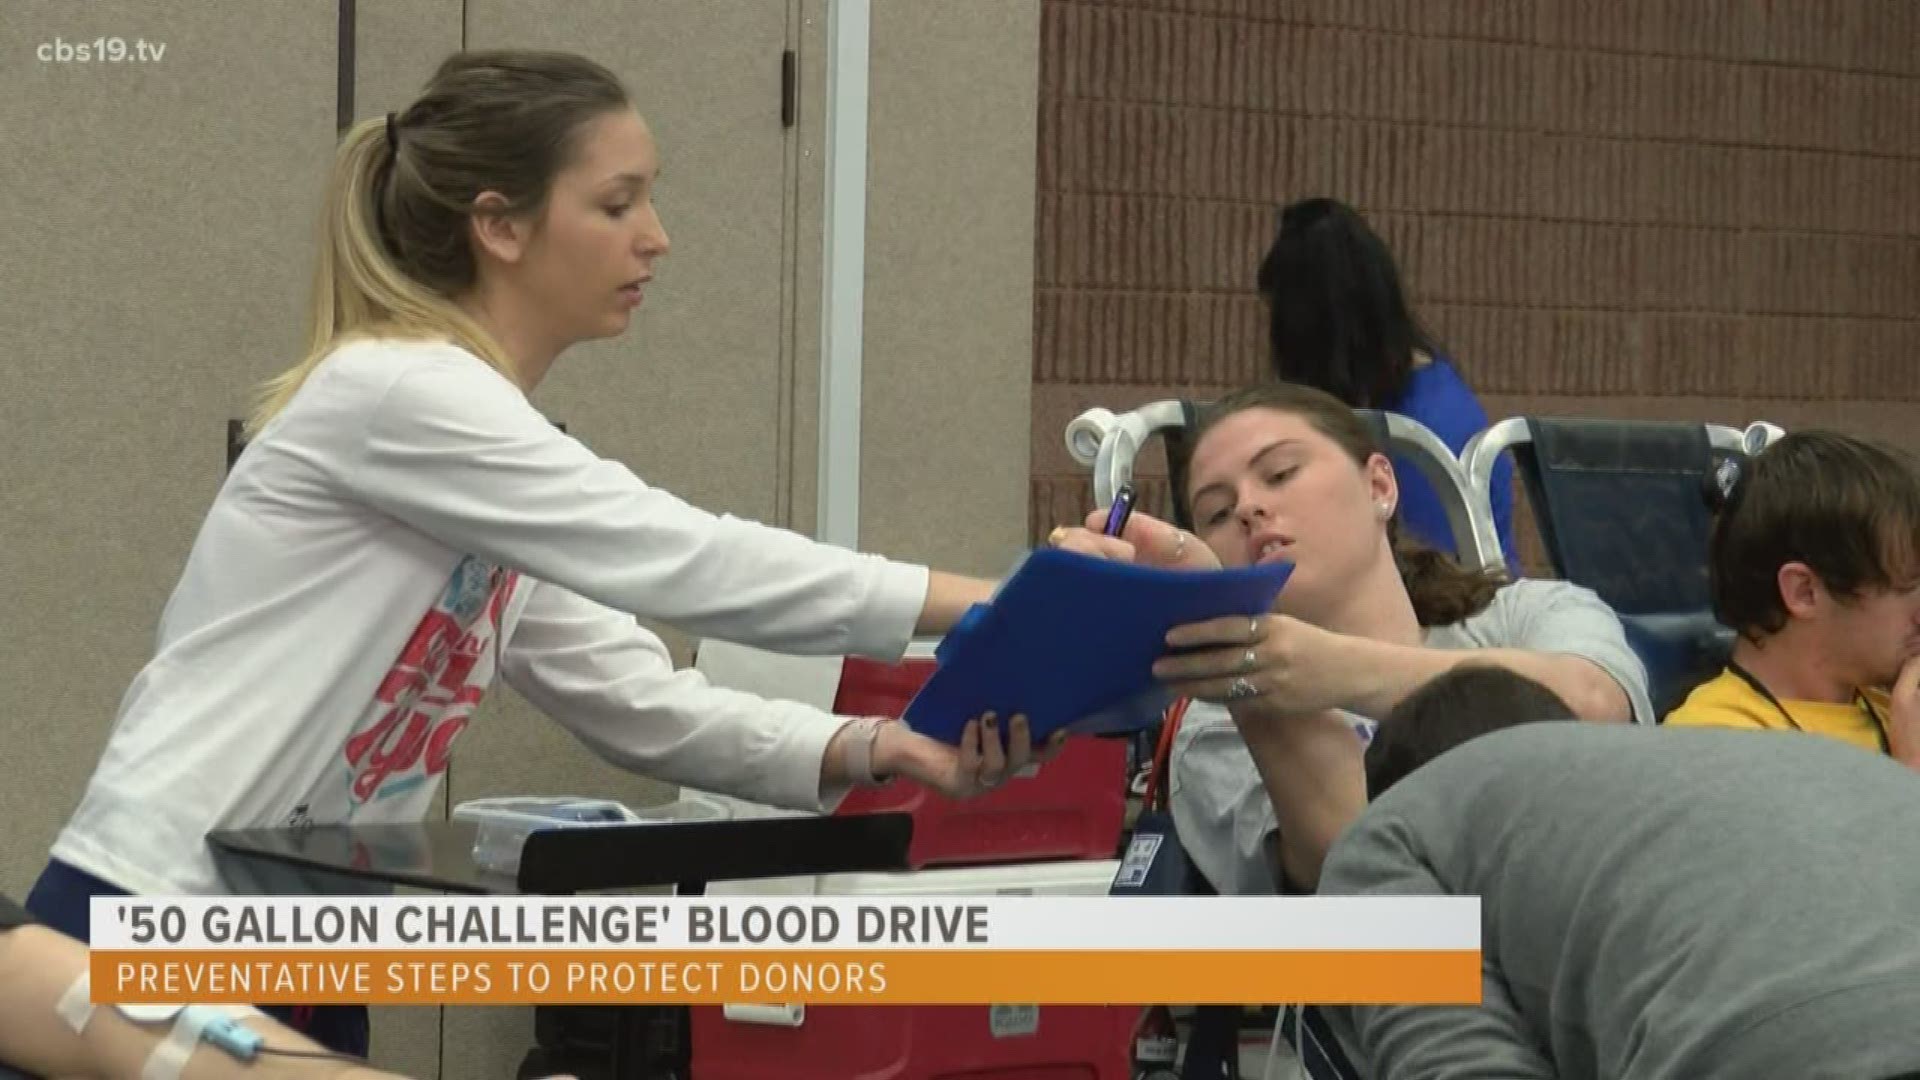 According to Jacquelyn Decker with Carter Bloodcare, they've implemented several social distancing measures to protect potential blood donors.